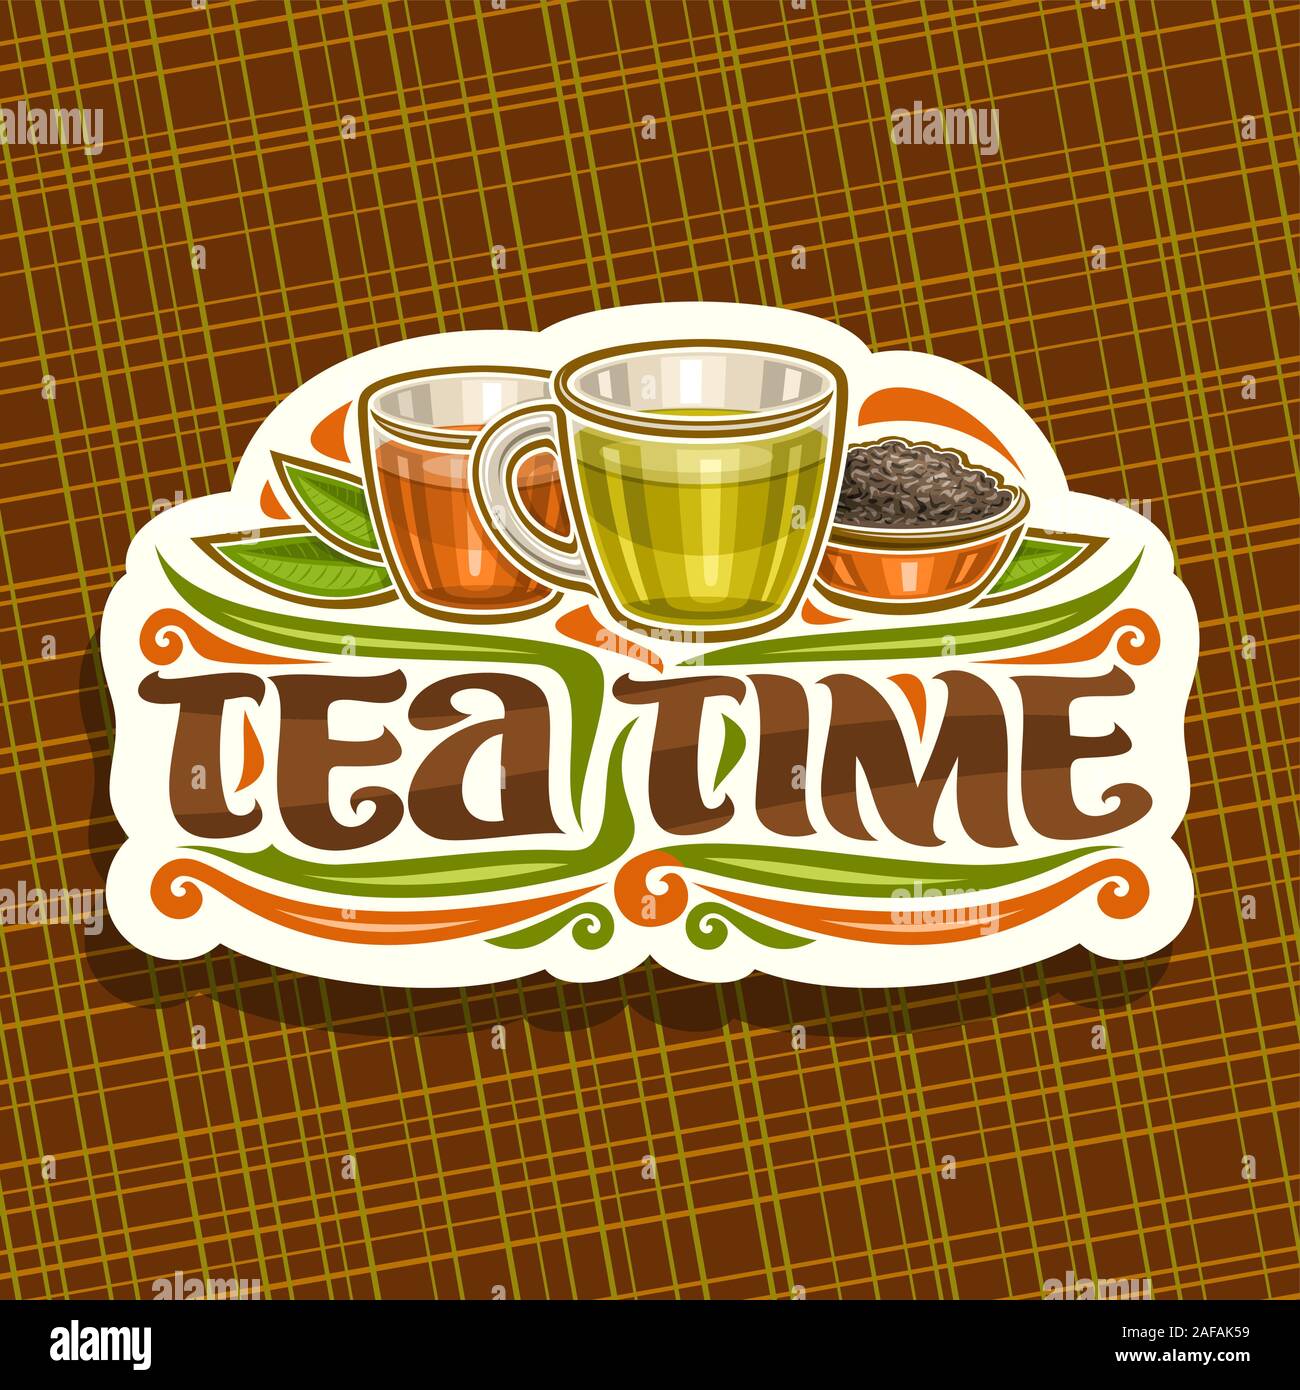 Vector logo for Tea Time, vintage cut paper sign with illustration of 2 glass cups with yellow and brown liquid, metal bowl with loose tea, decorative Stock Vector